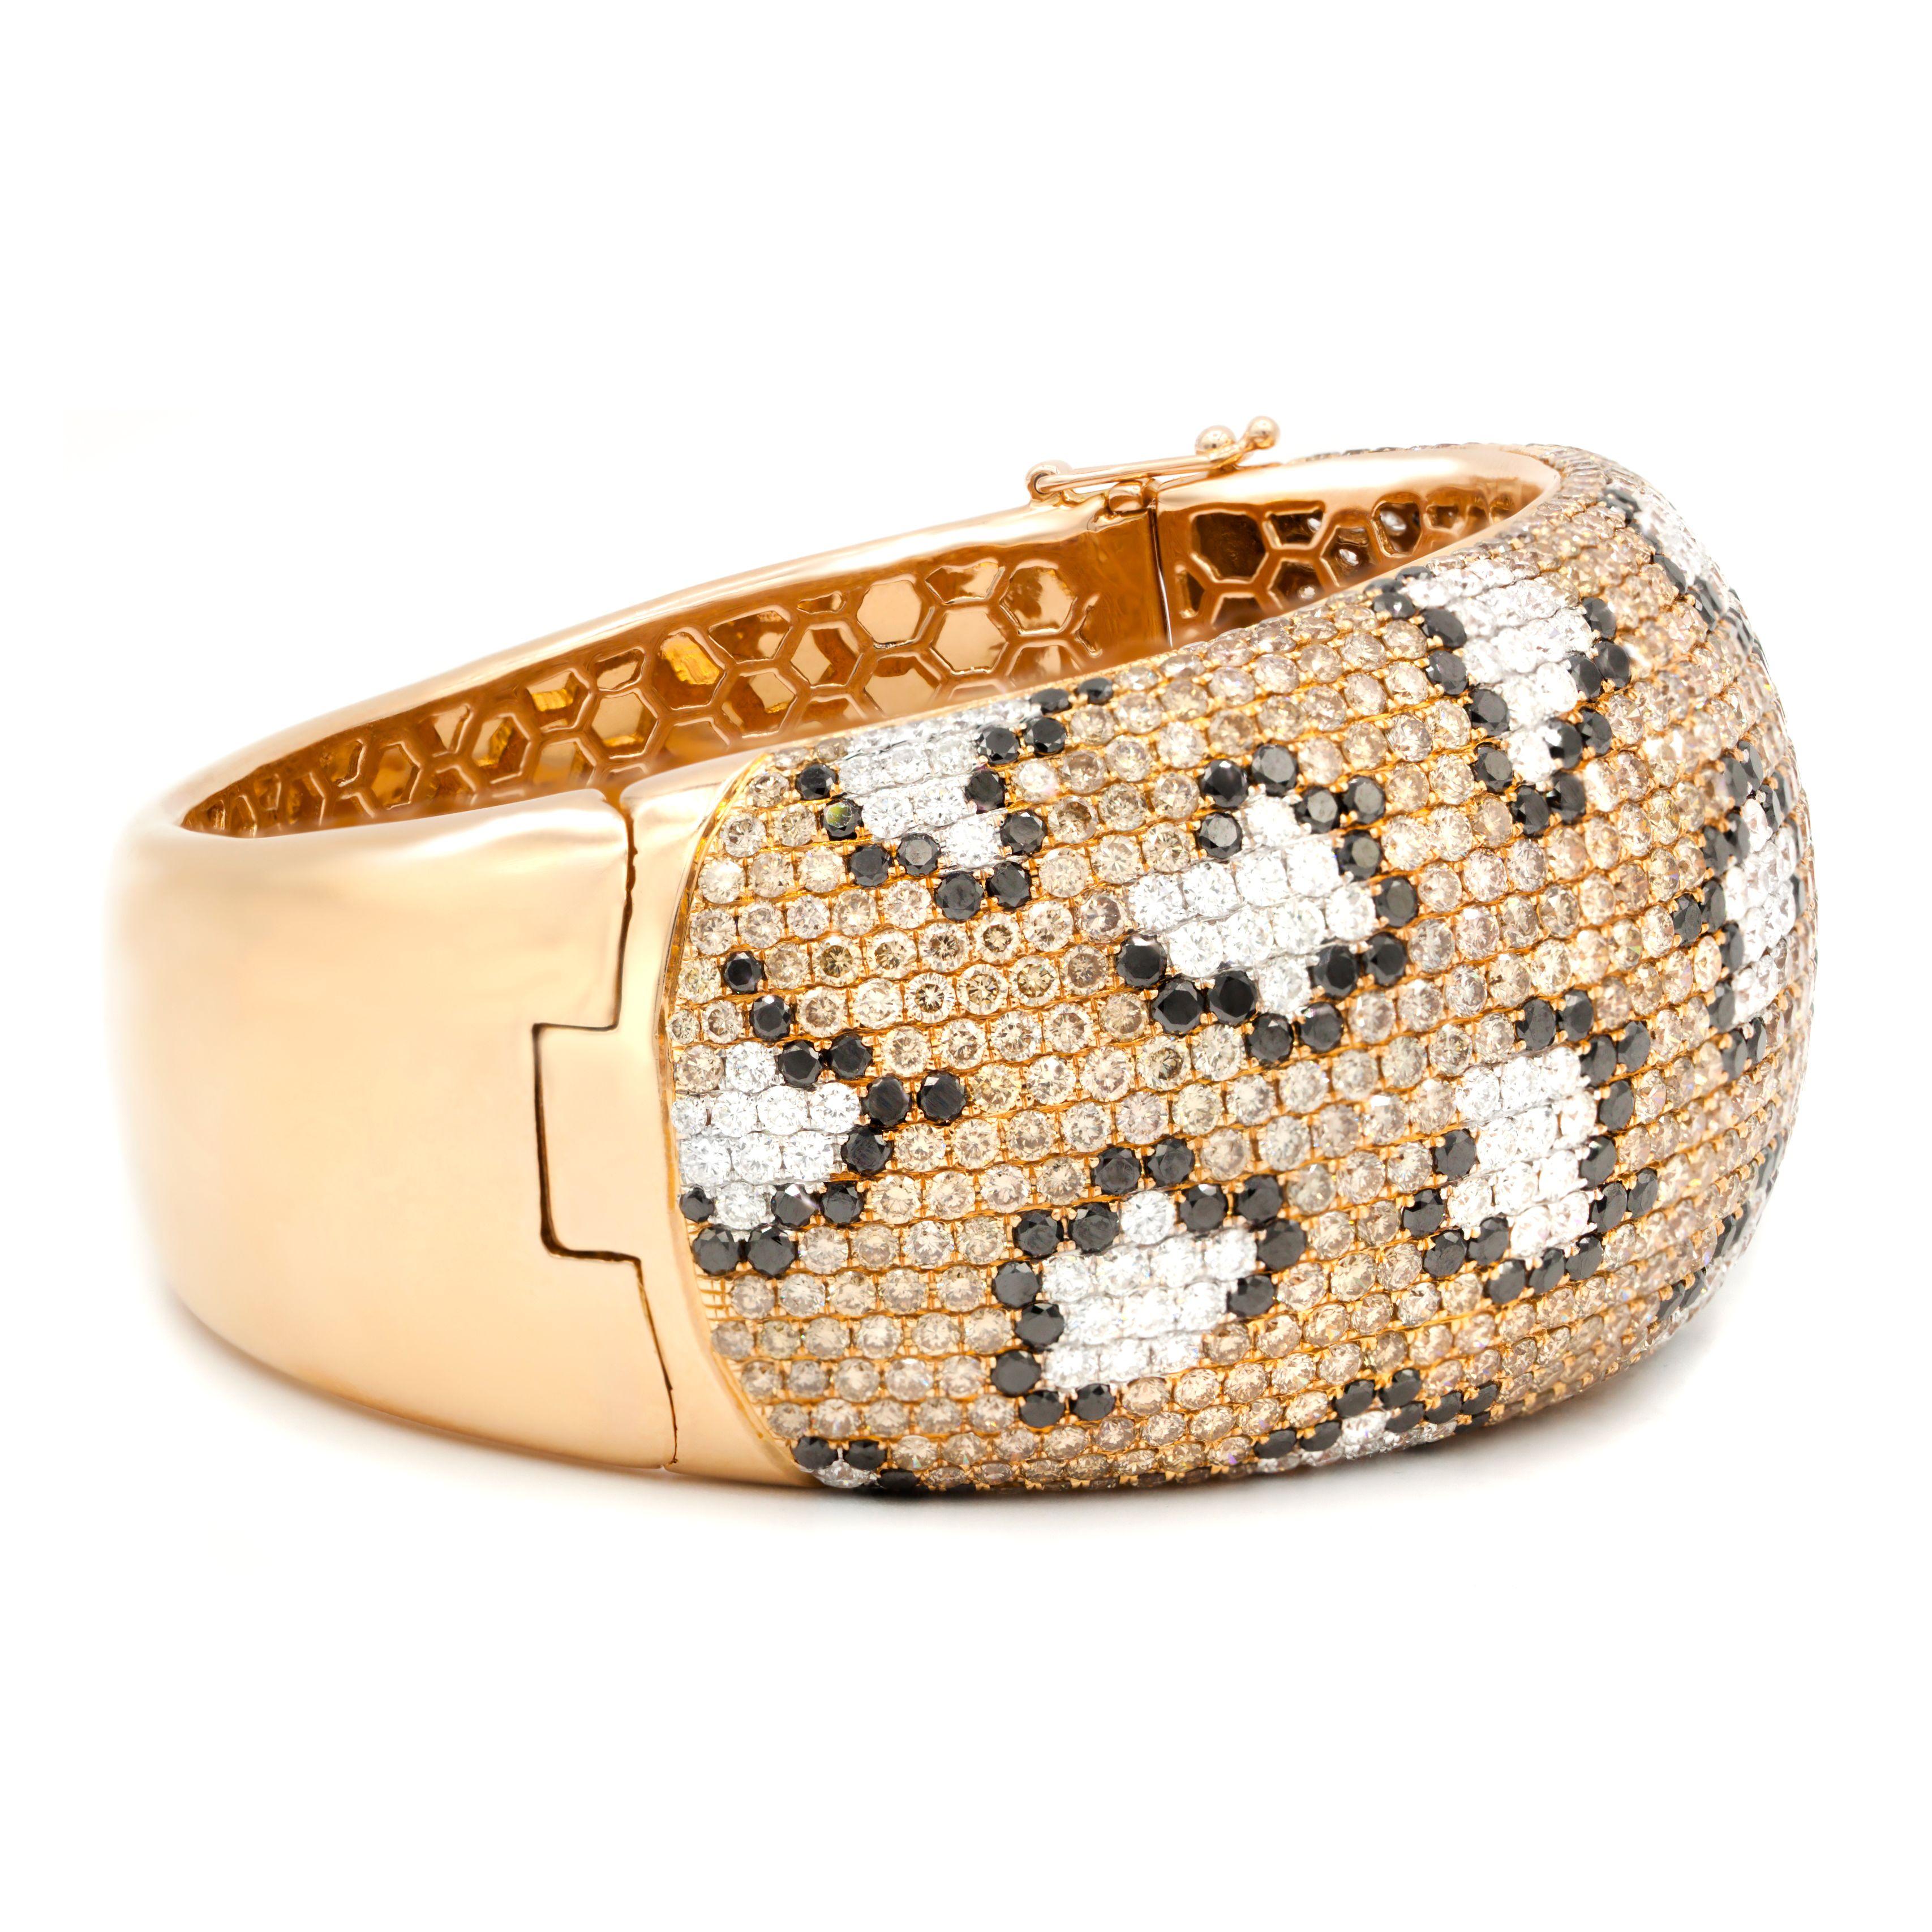 18 kt rose gold diamond bangle adorned with yellow diamonds and black and white spots totaling 23.55 cts tw of diamonds